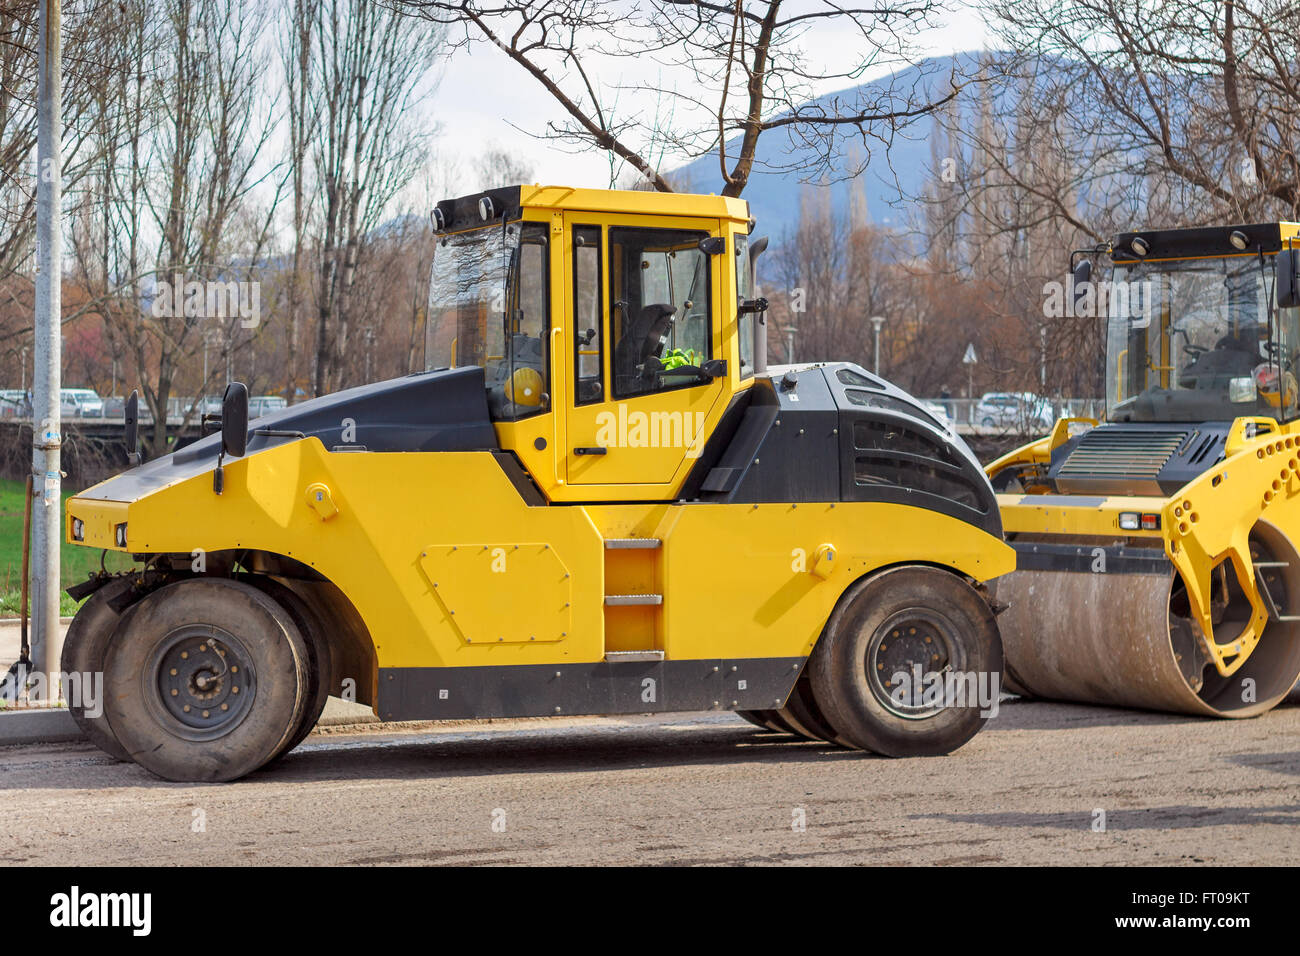 Road construction vehicles, yellow road roller. Stock Photo